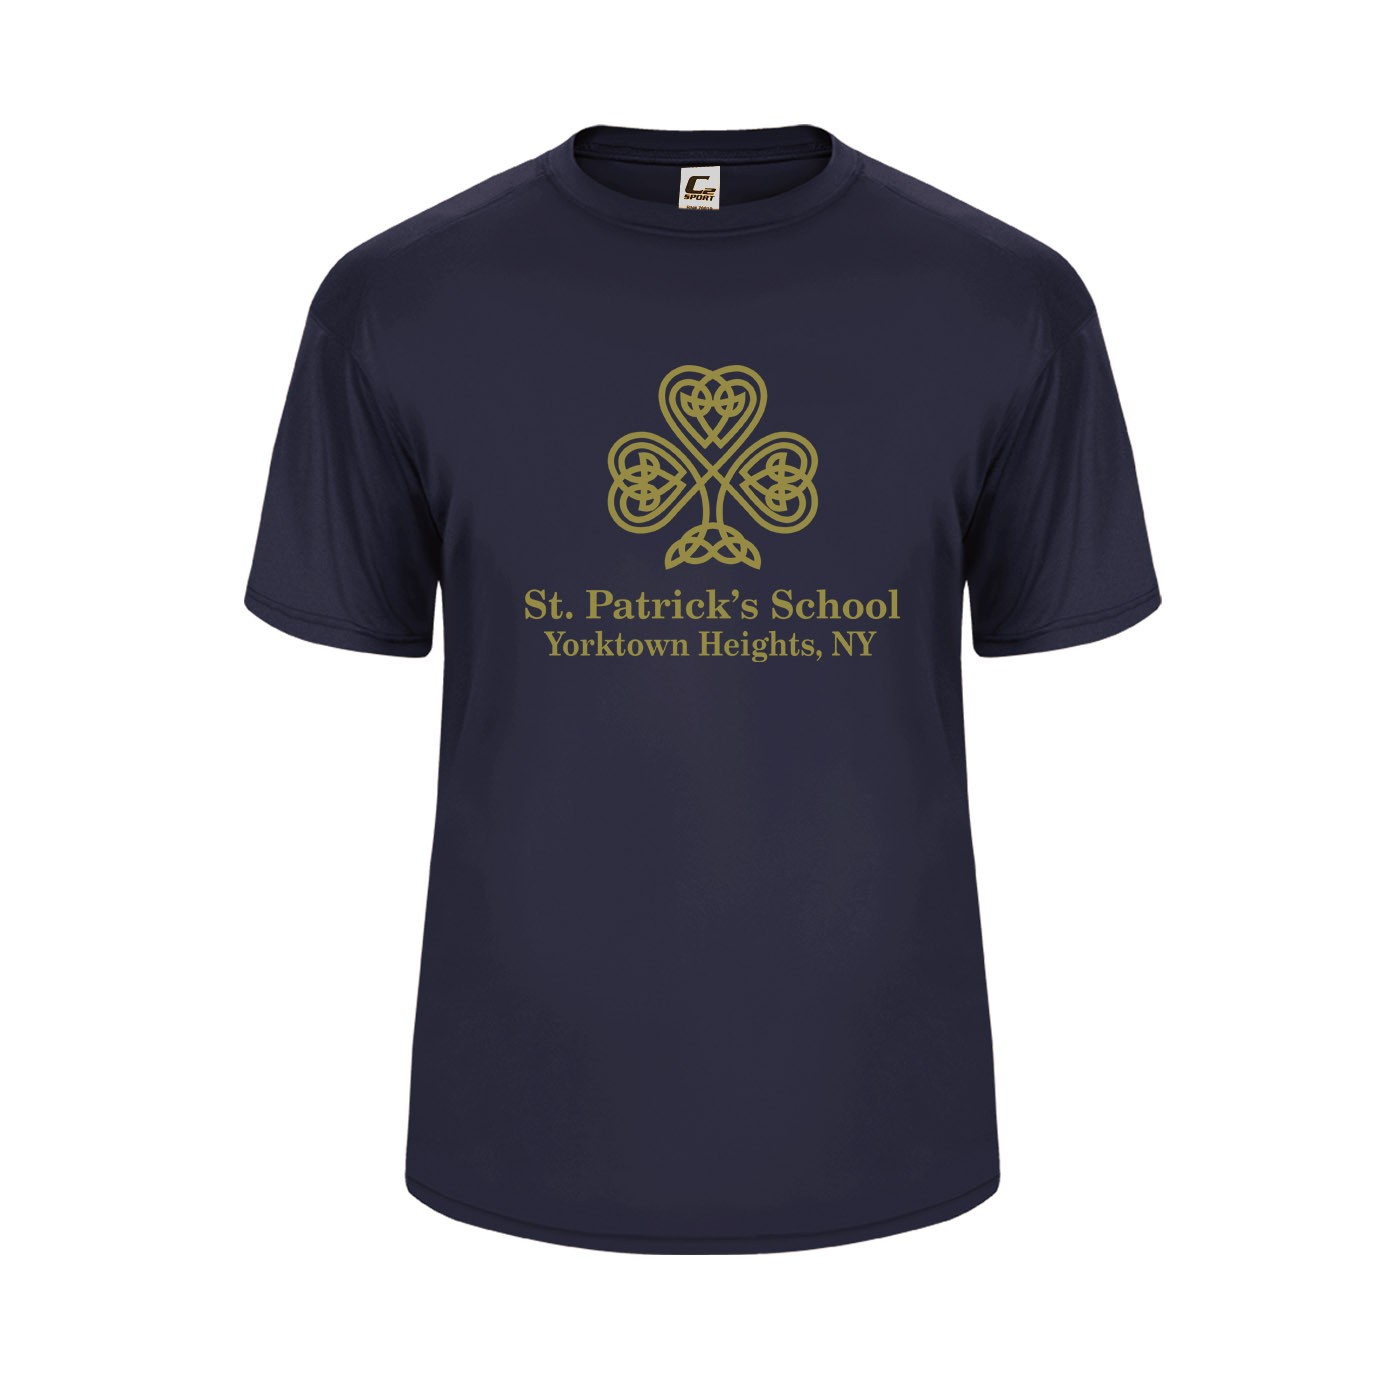 SPS S/S Spirit Performance T-Shirt w/ Full Front Gold Logo - Please Allow 2-3 Weeks for Delivery